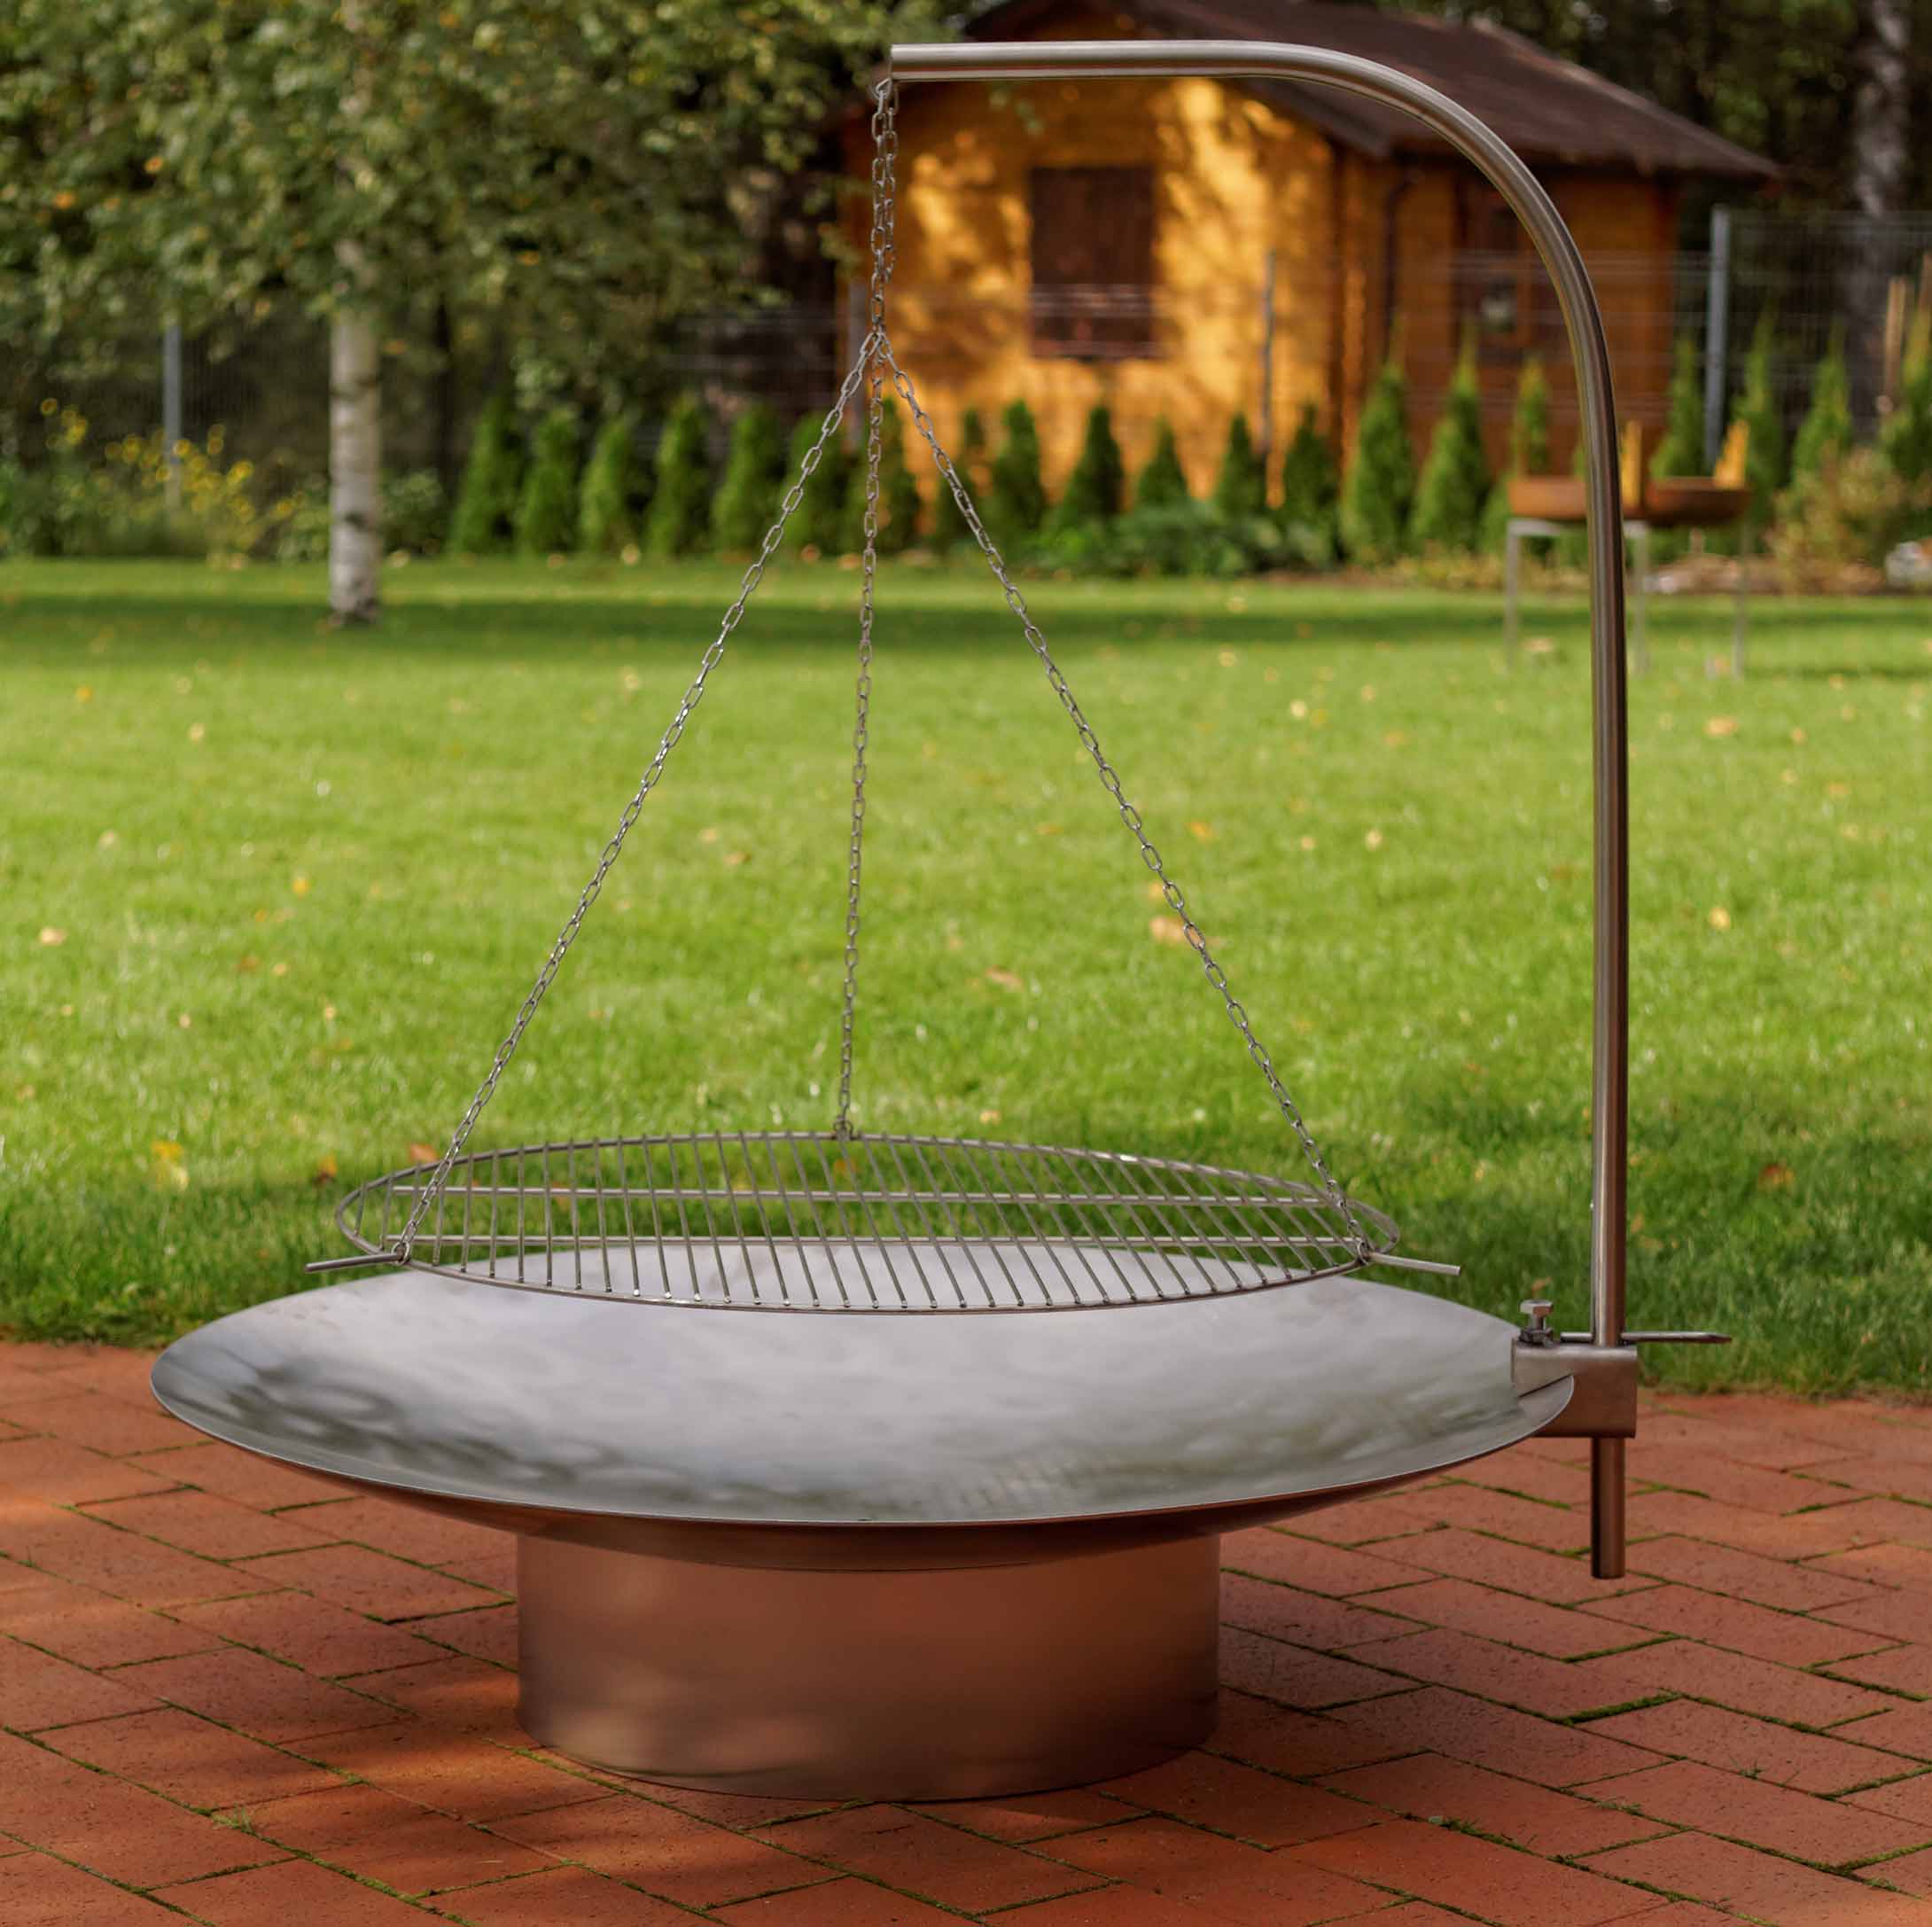 Hestia Stainless Fire Pit, Stainless Steel Fire Pit Grate